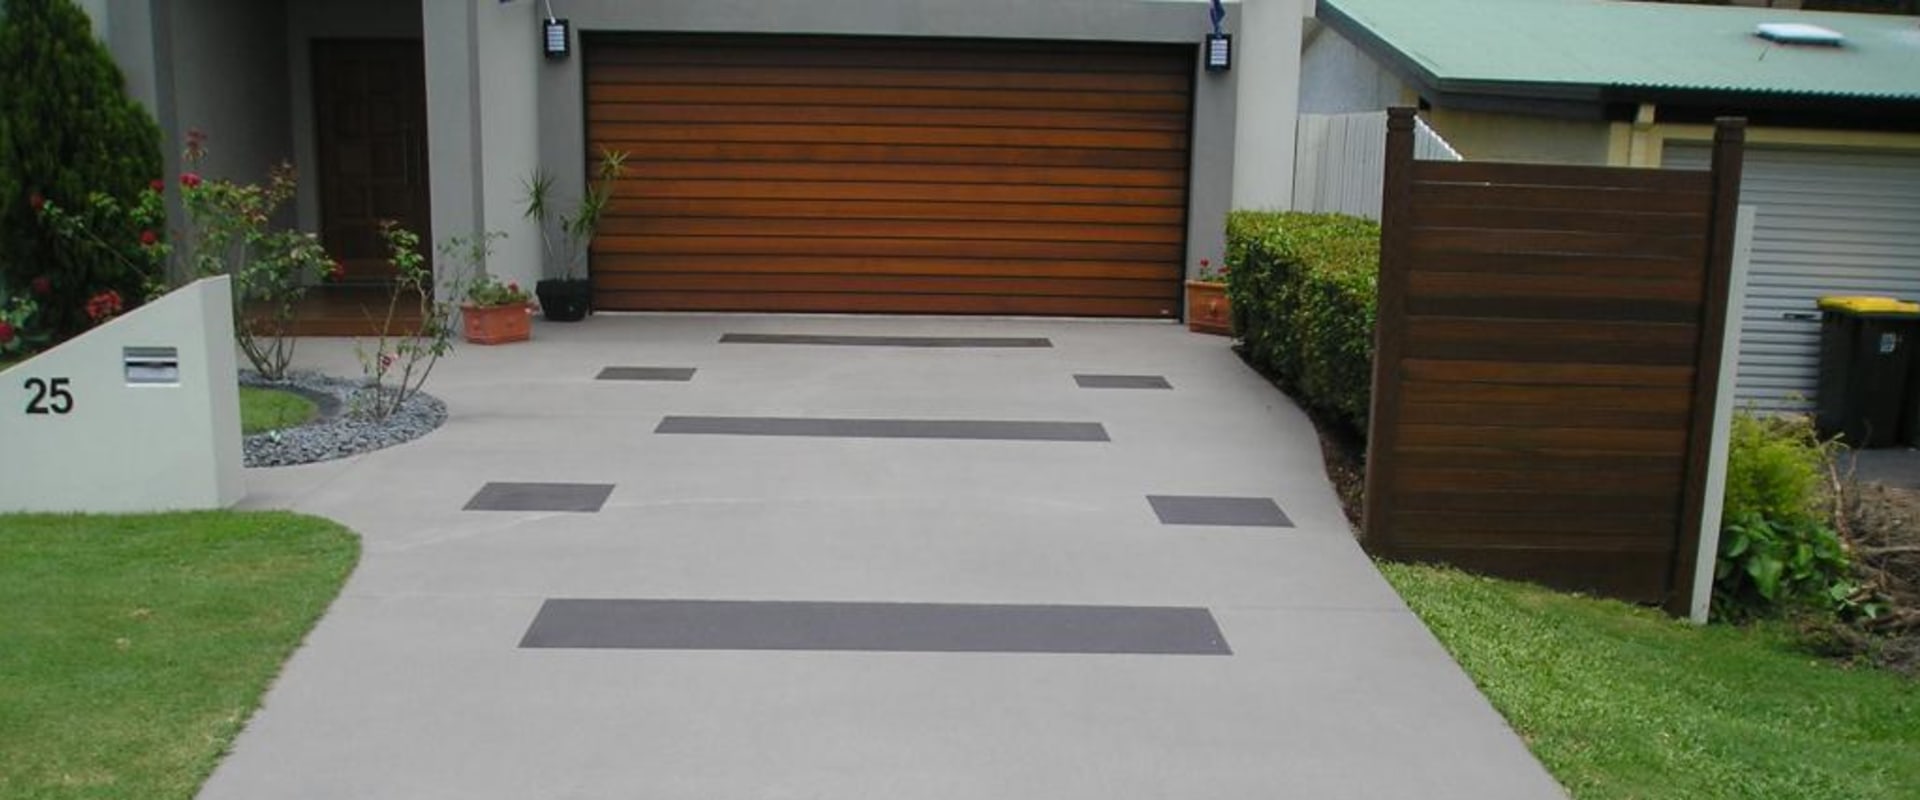 How Much Does Concrete Resurfacing Cost in Australia?